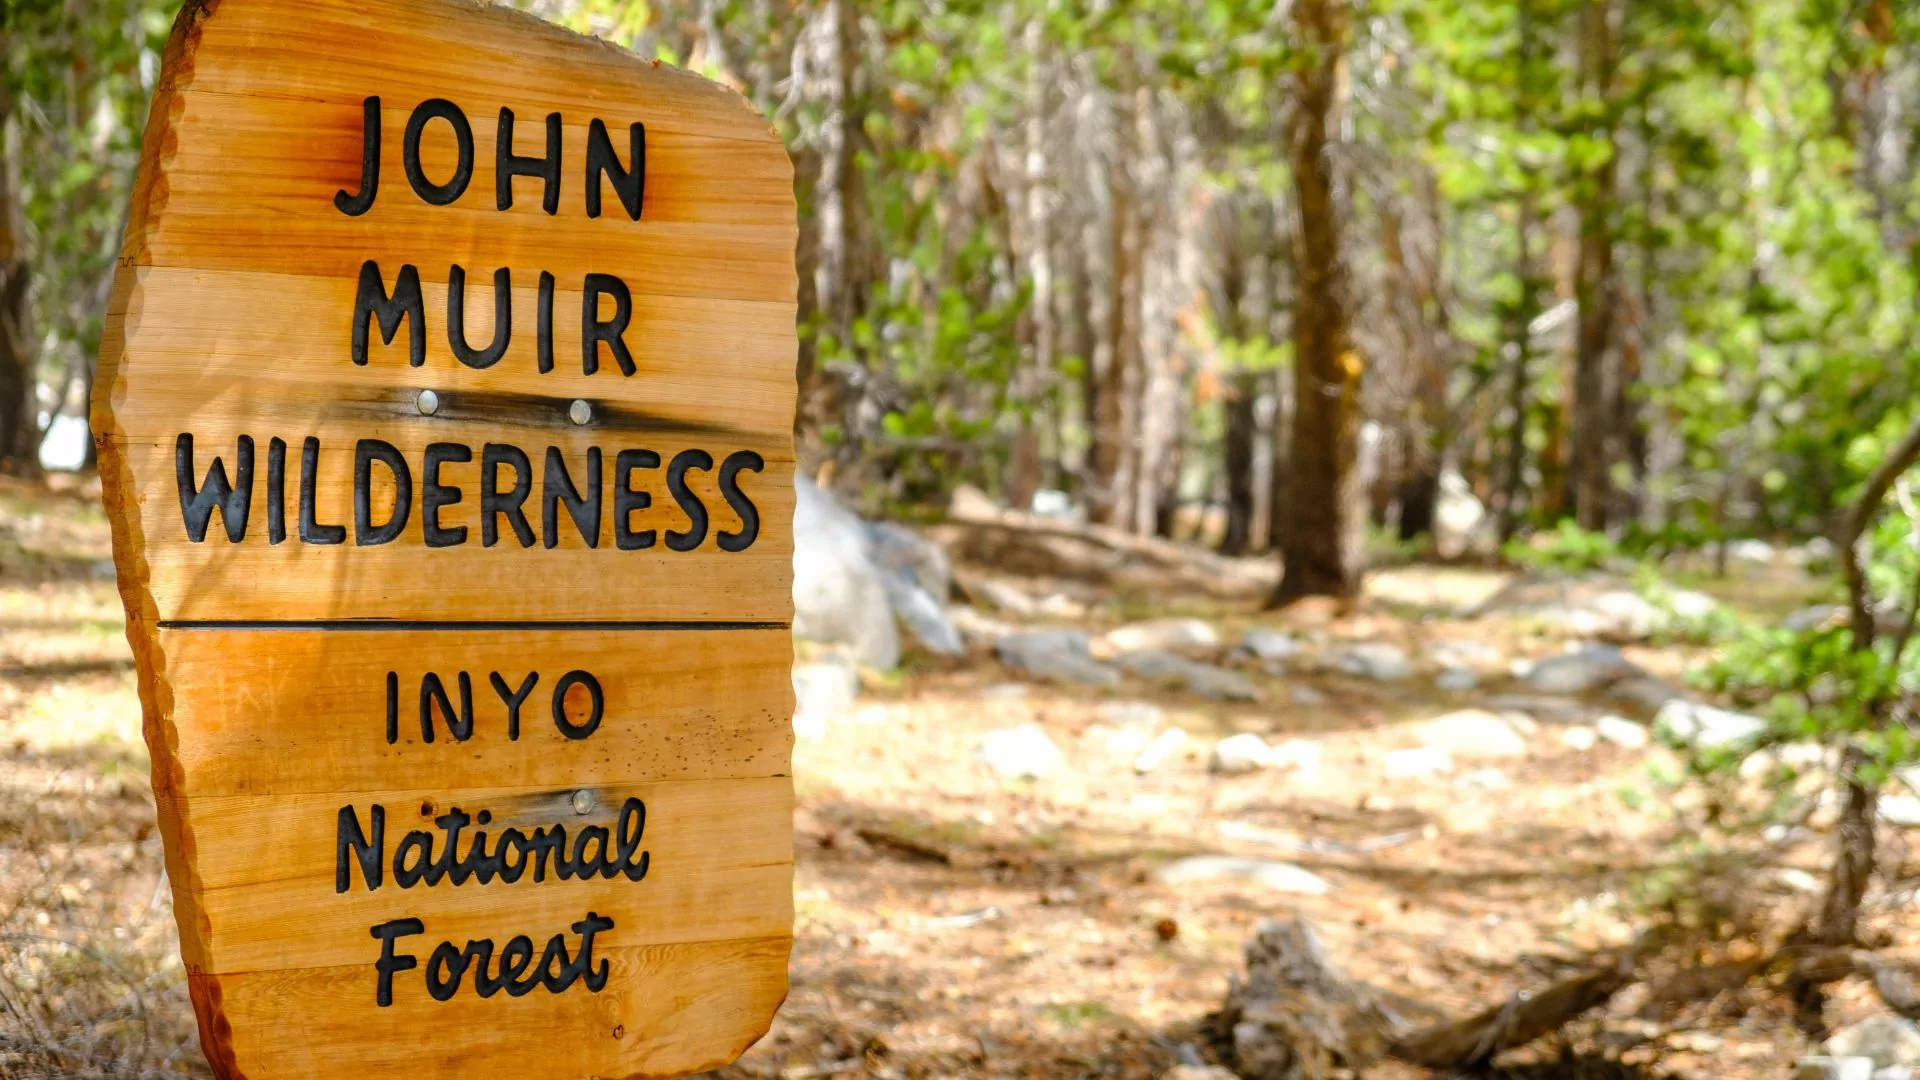 A wilderness sign stands along the side of the John Muir trail in California's Sierra Nevada